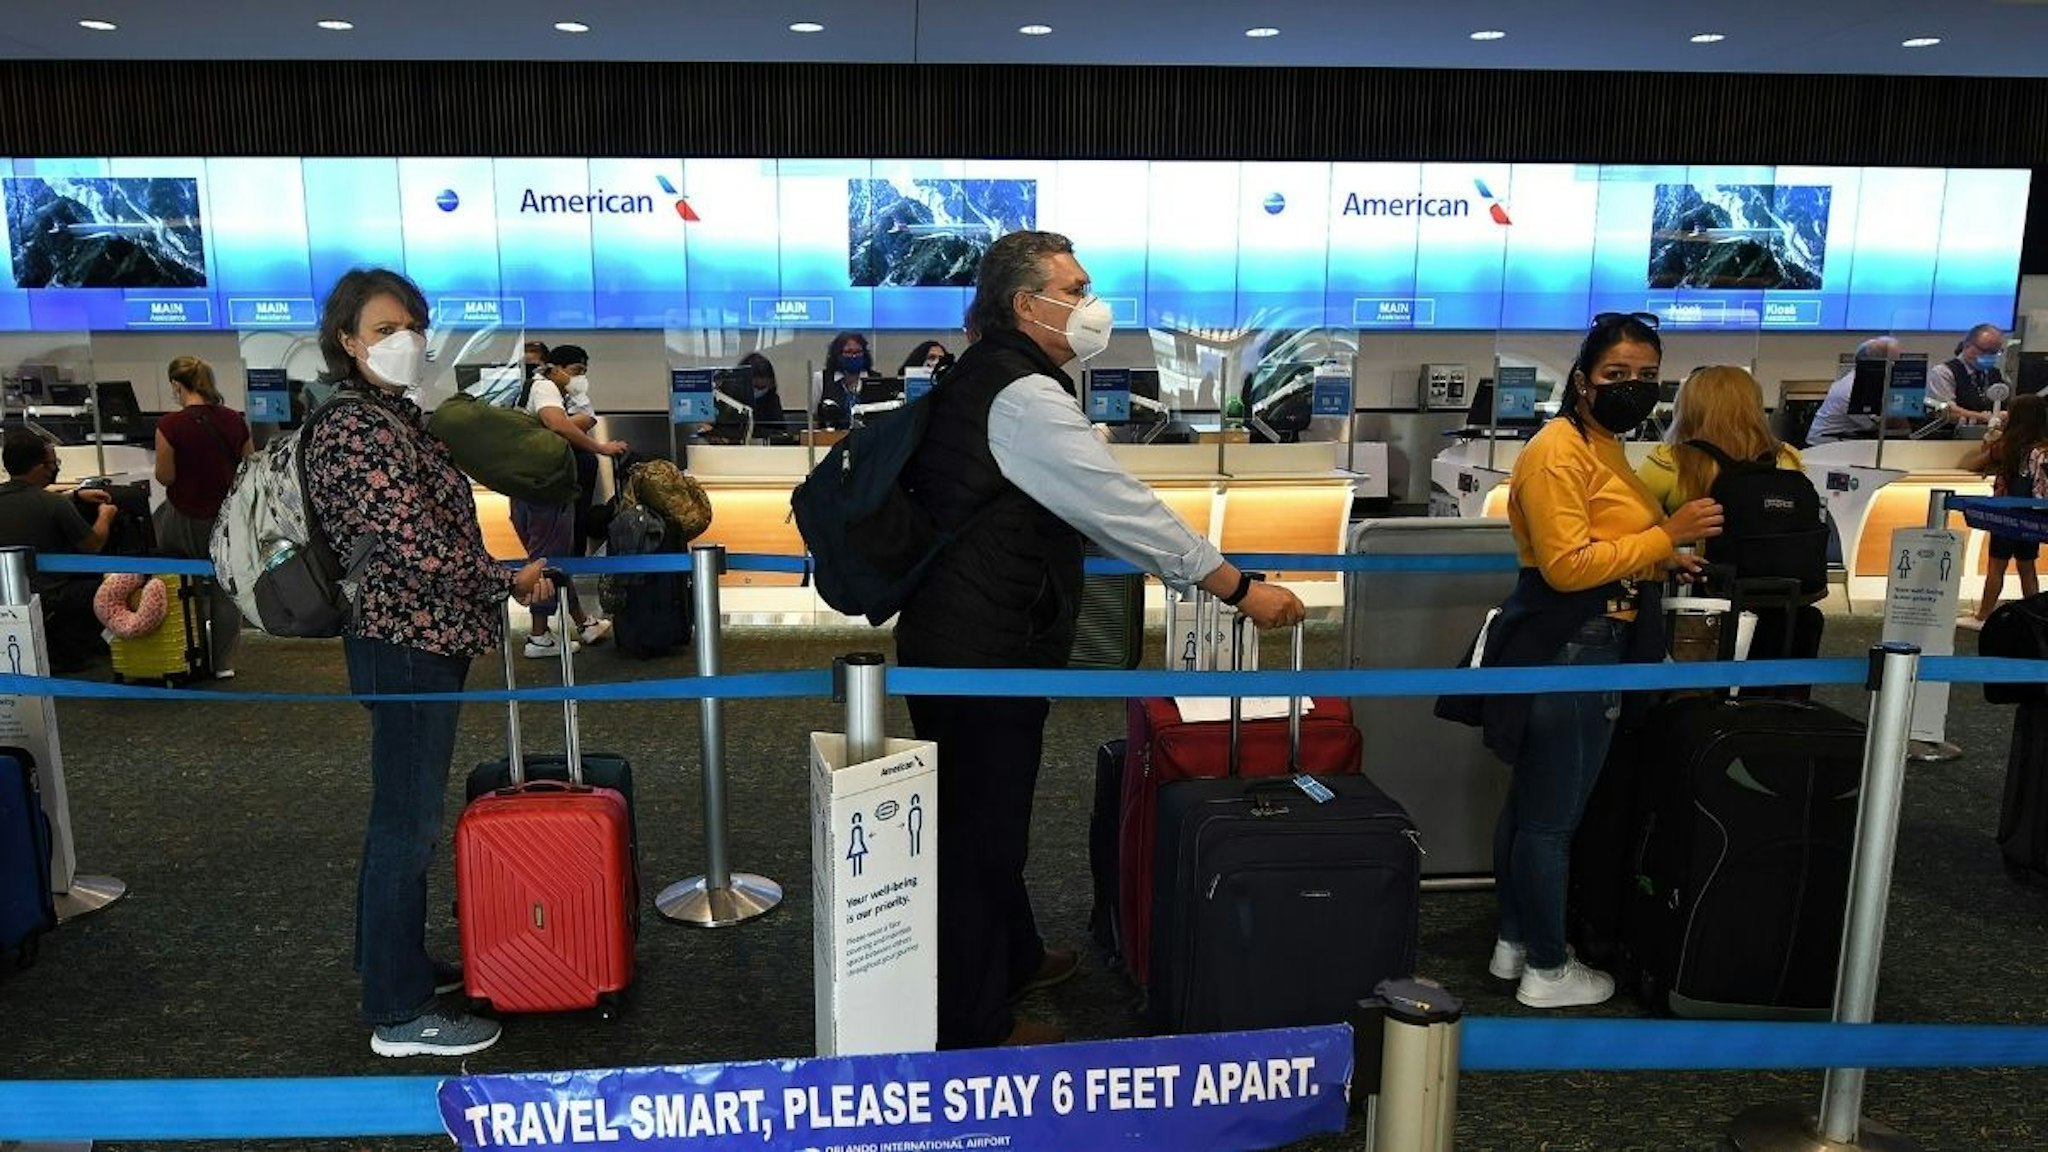 Travelers wearing face masks as a preventive measure against the spread of covid-19 wait in line at the American Airlines ticket counter at Orlando International Airport.